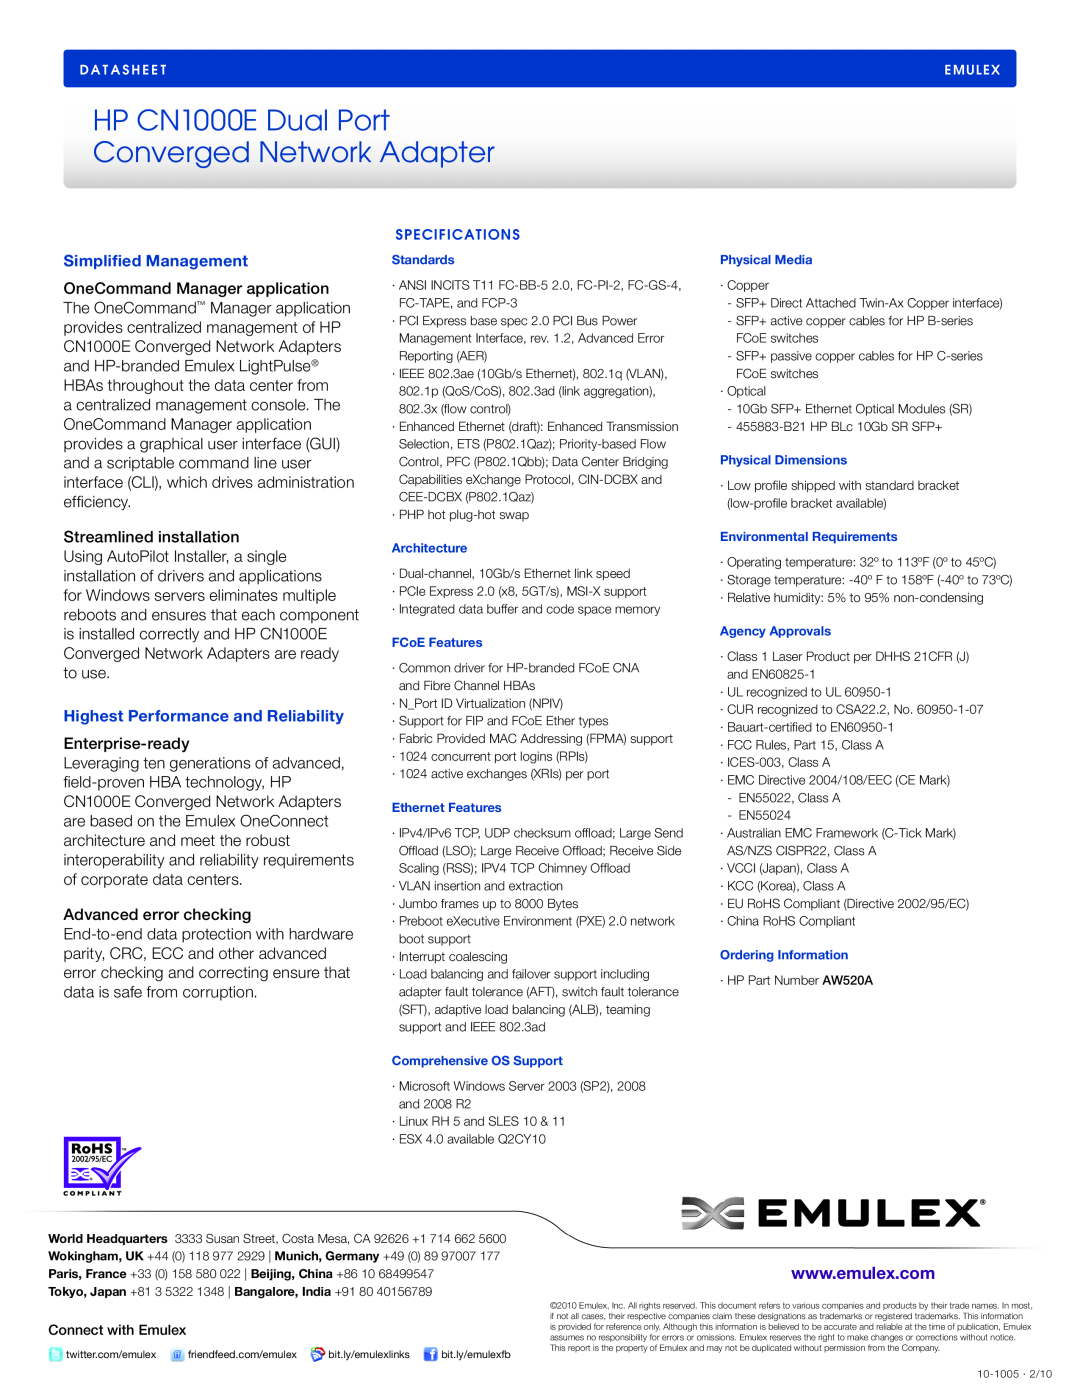 Emulex manual Simplified Management, Highest Performance and Reliability, HP CN1000E Dual Port Converged Network Adapter 